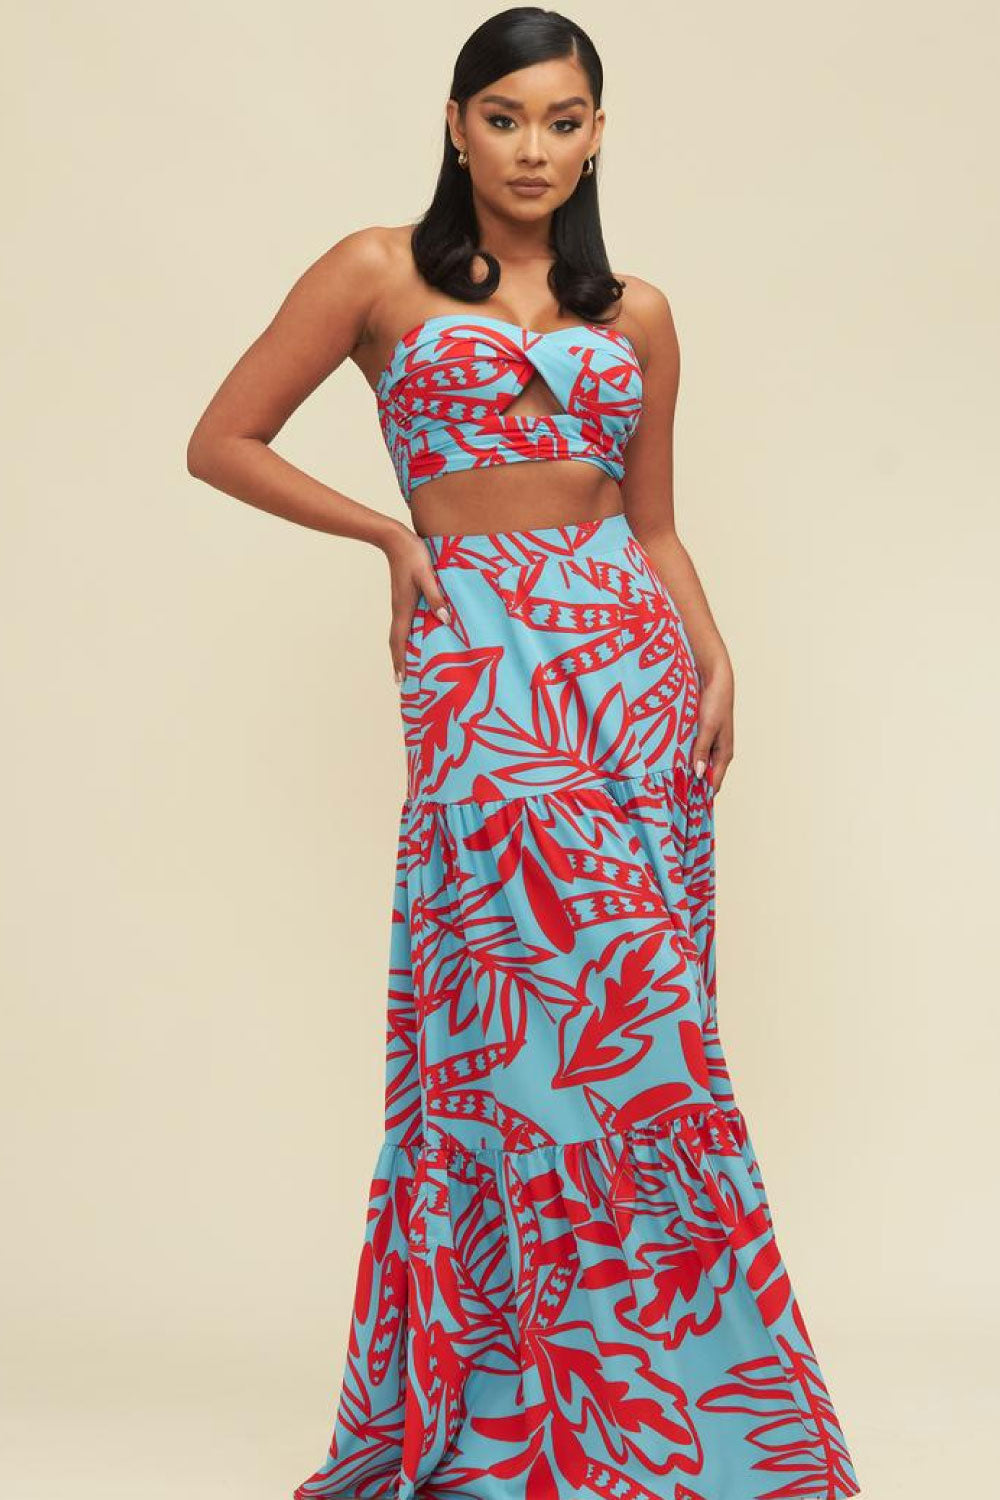 Image of the front of the Striped Red and Blue Two Piece Set on a model.